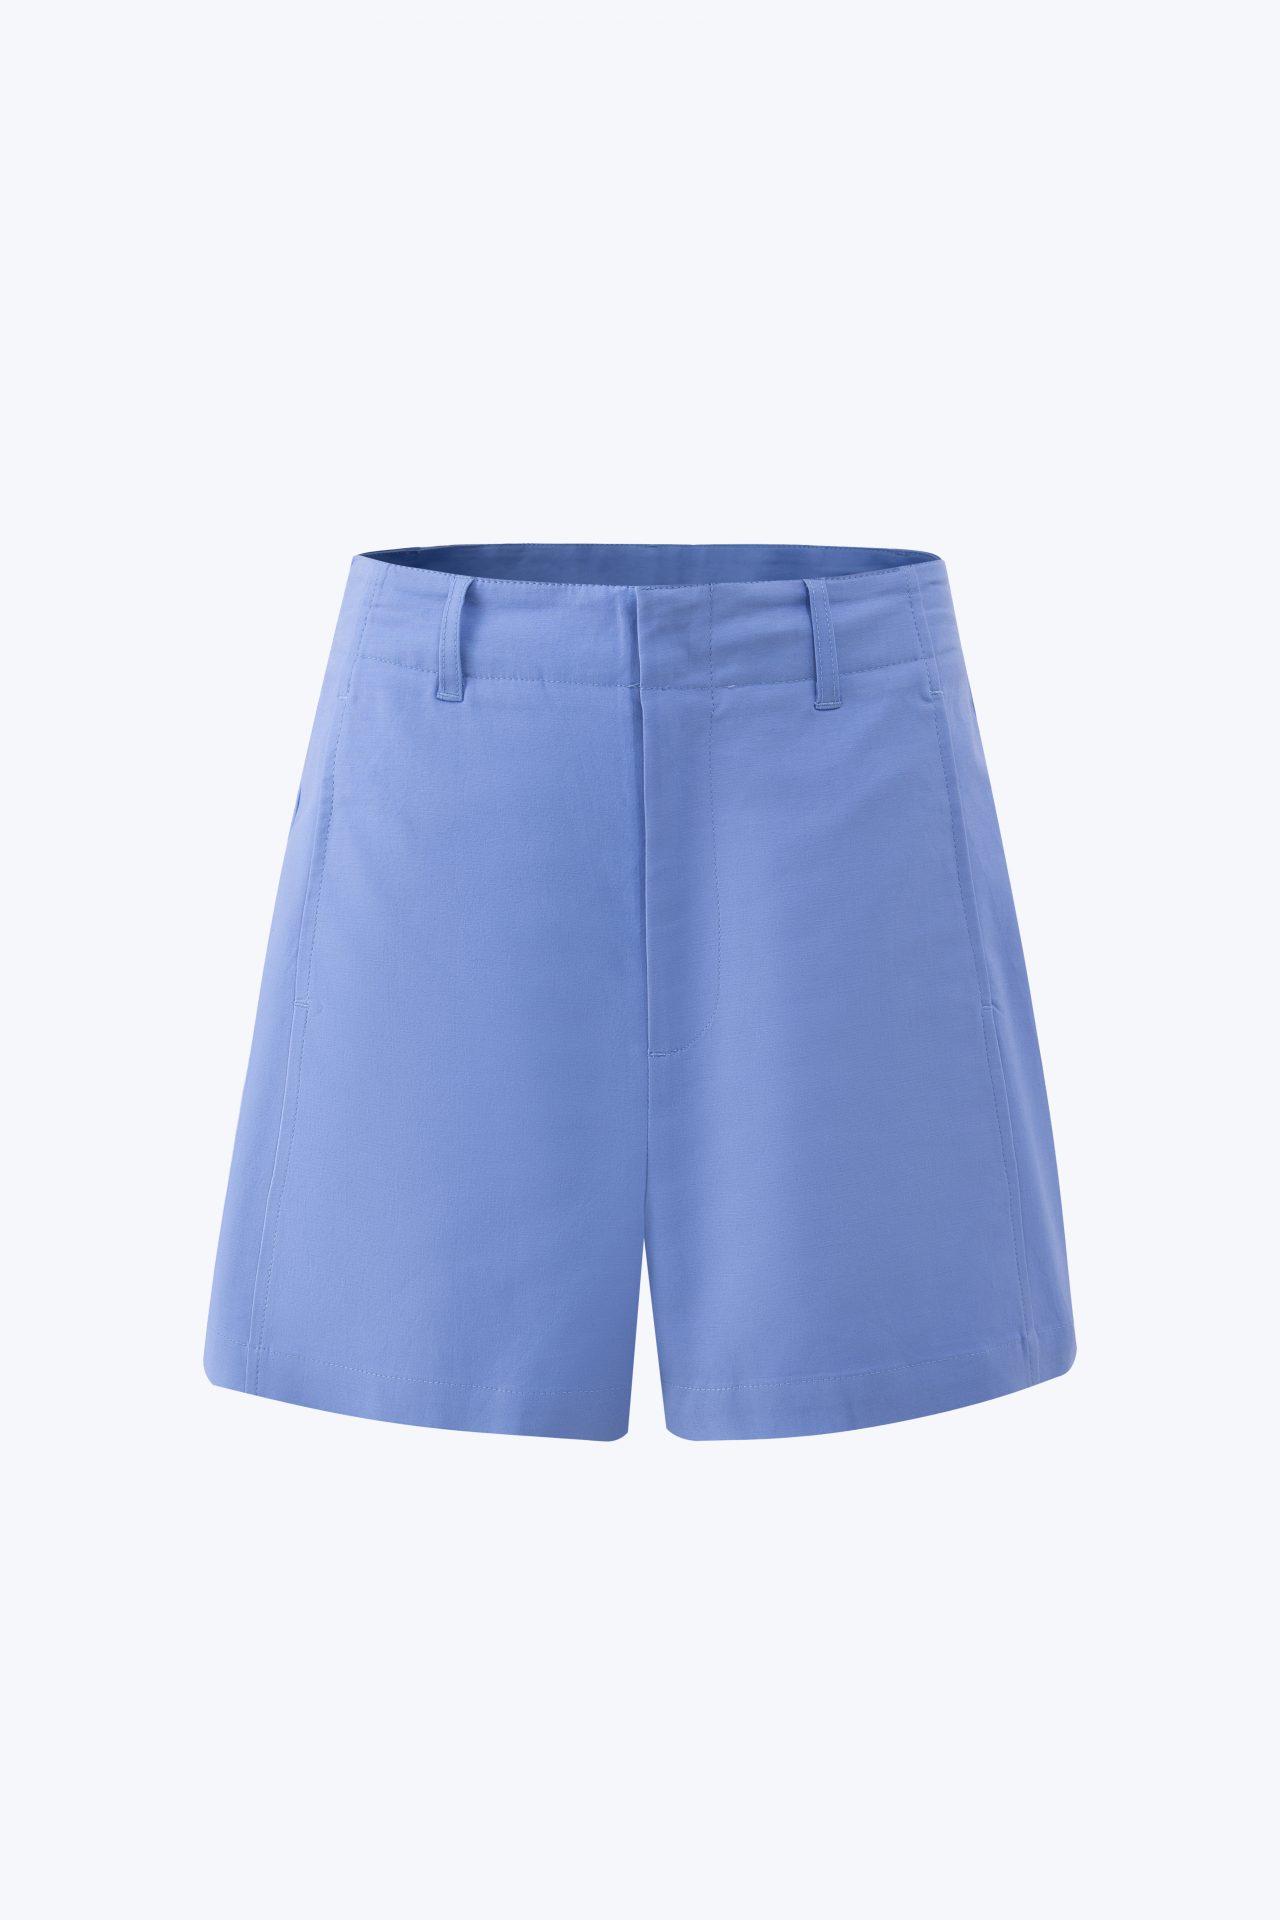 CPS 01267 A SEAM DETAIL SHORTS PERIWINKLE